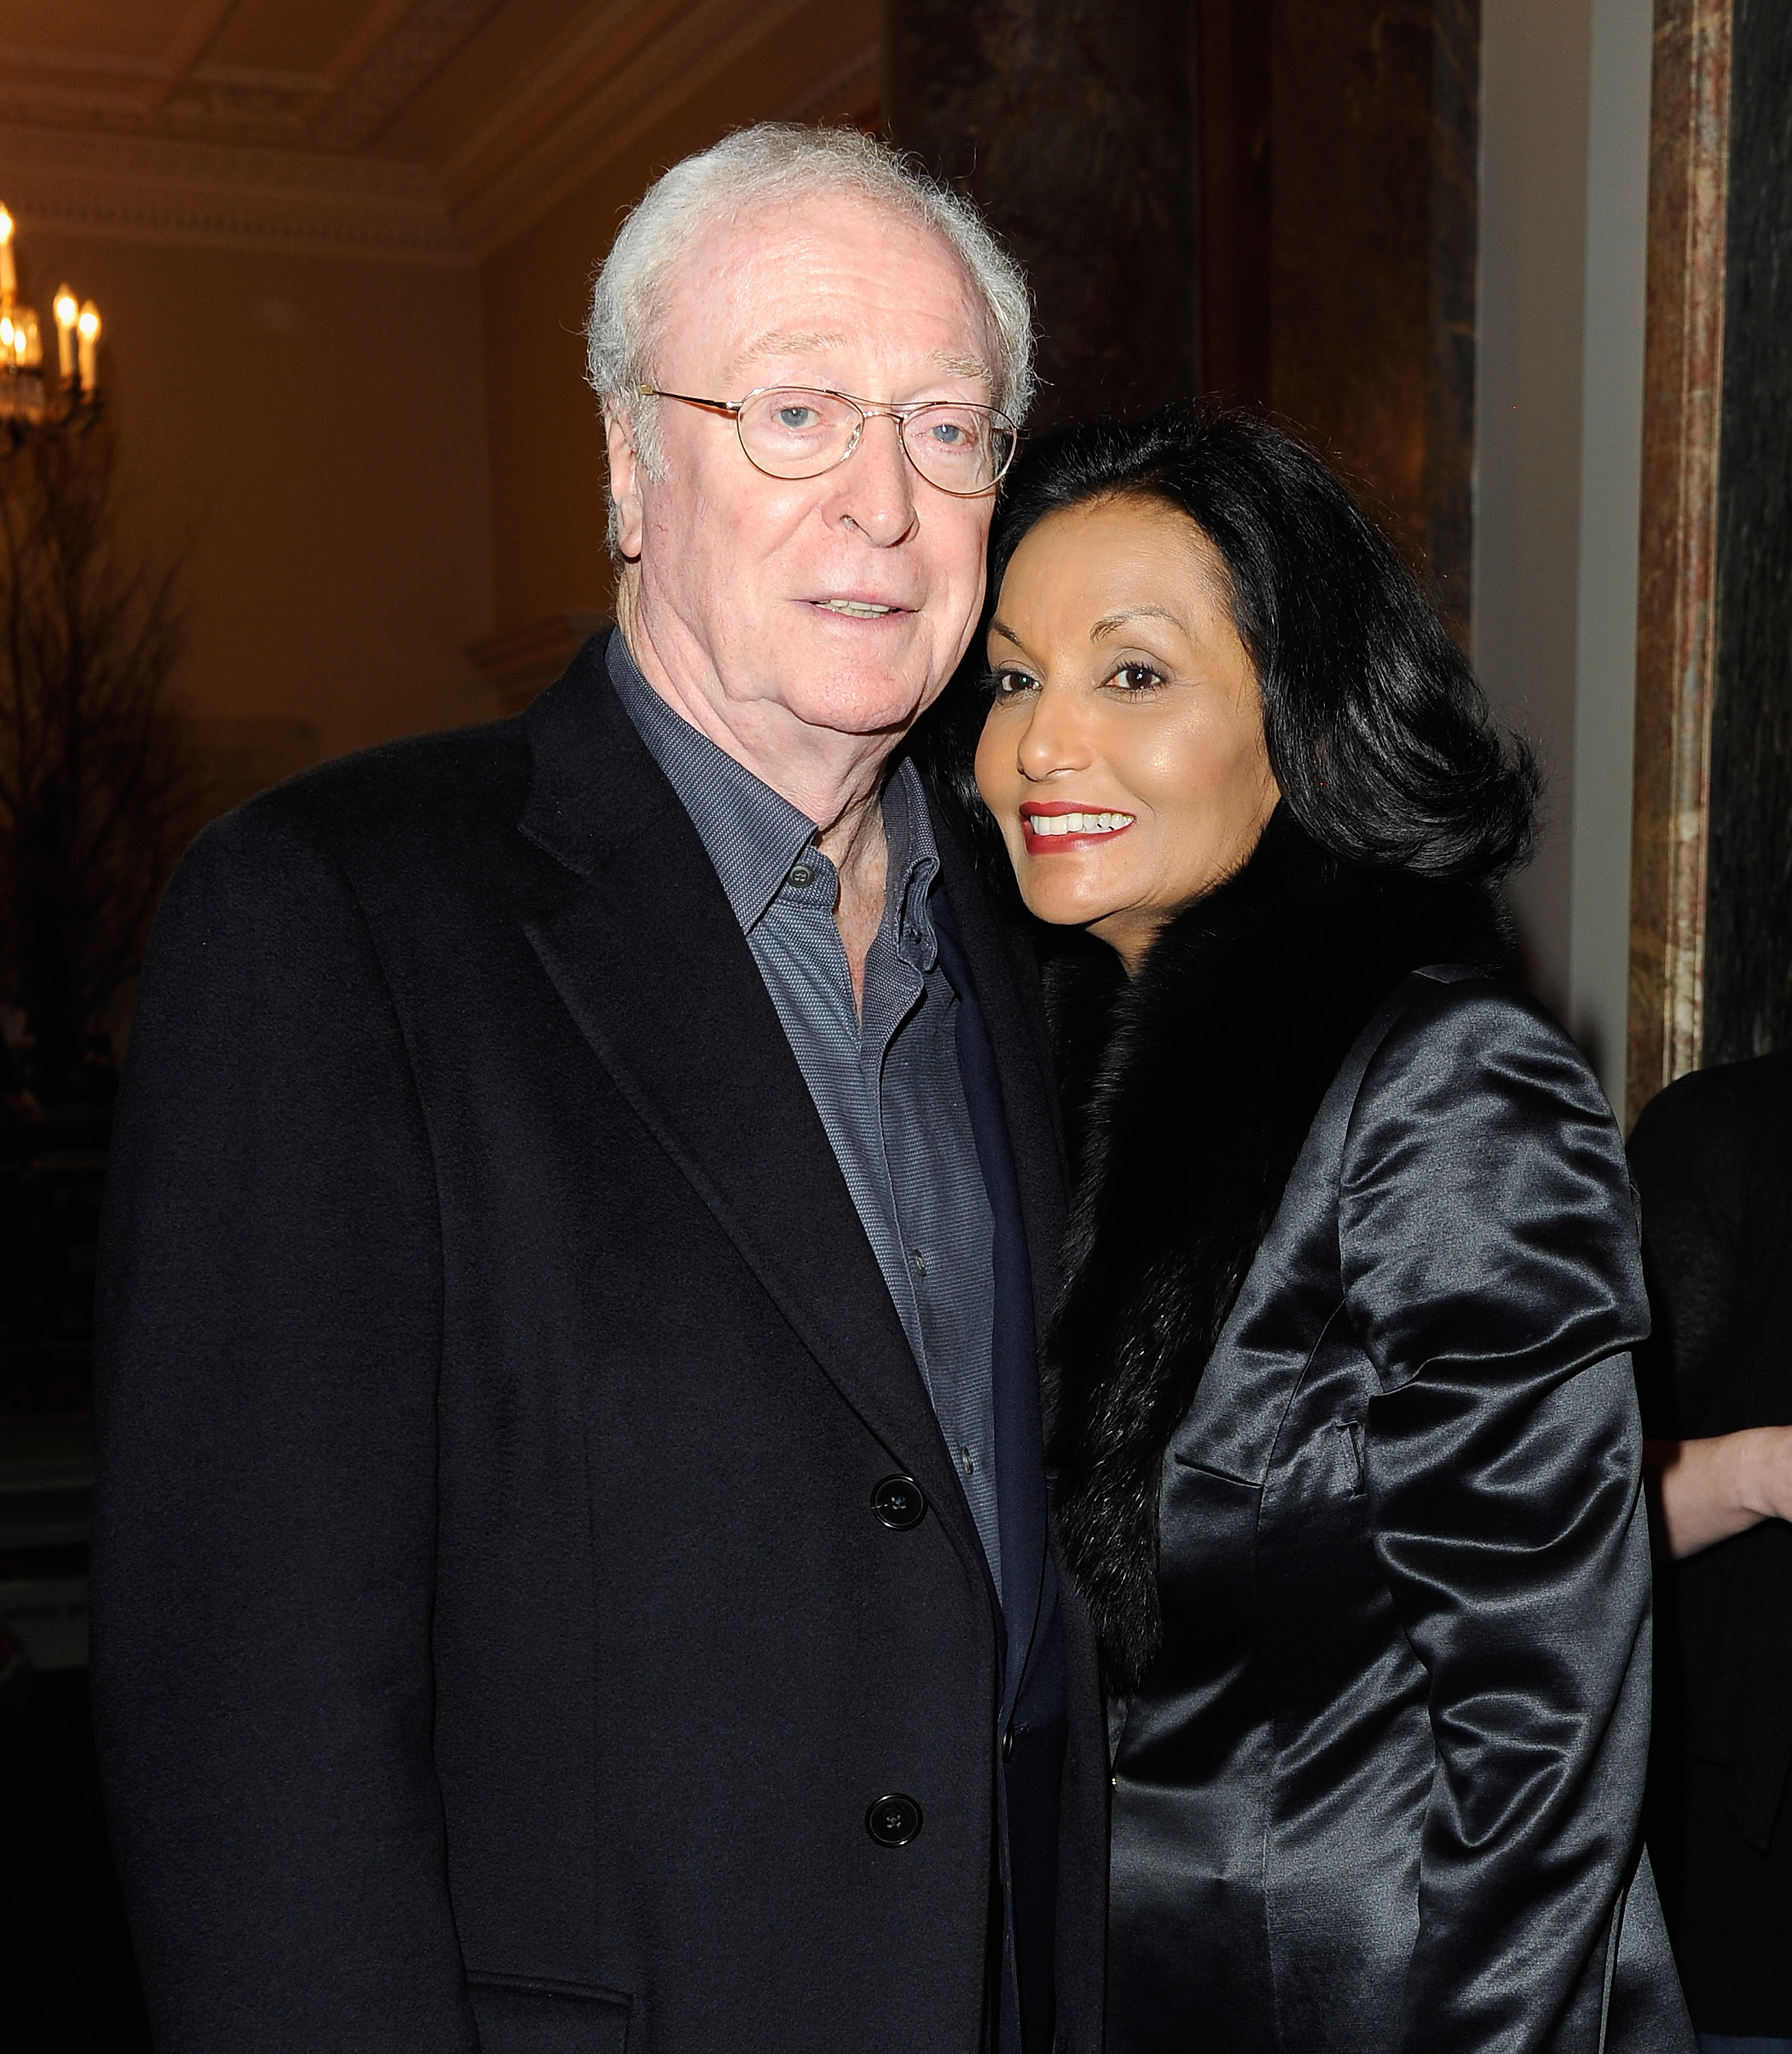 Michael Caine and Shakira Caine  at The David Hockney Private View at The Royal Academy of Arts on January 17, 2012 in London, England | Source: Getty Images